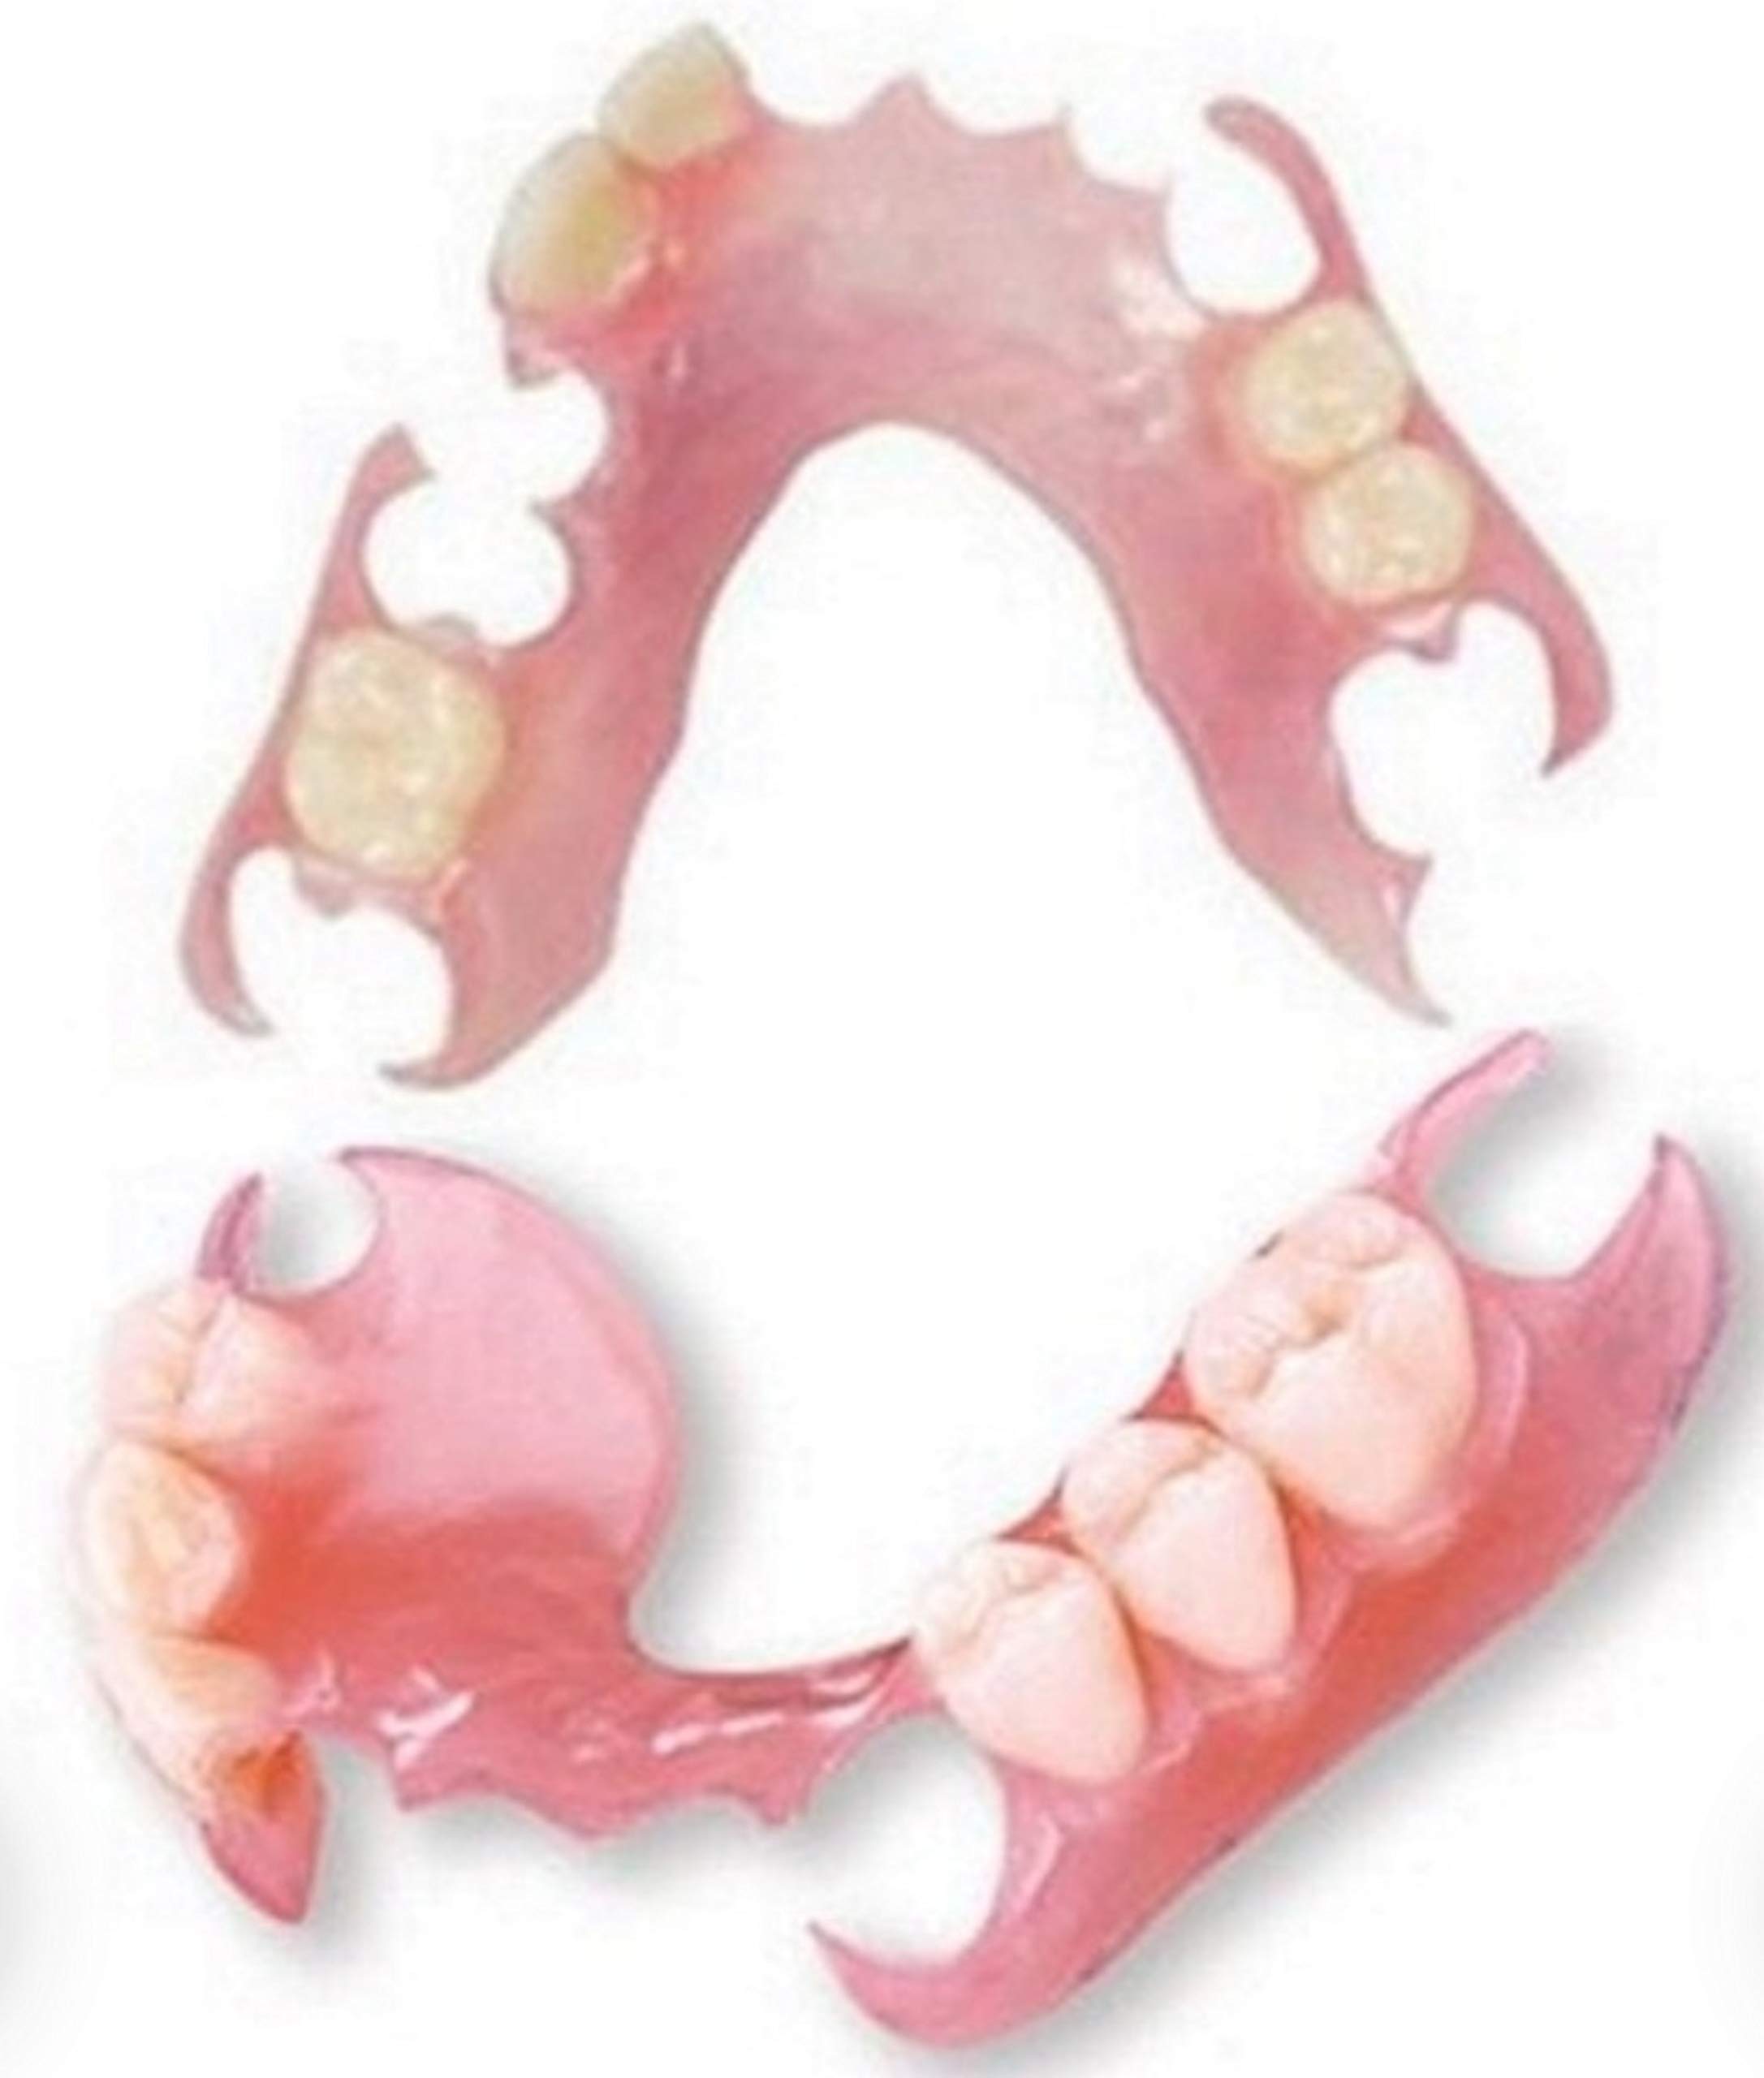 What are the reasons for buying dentures online?